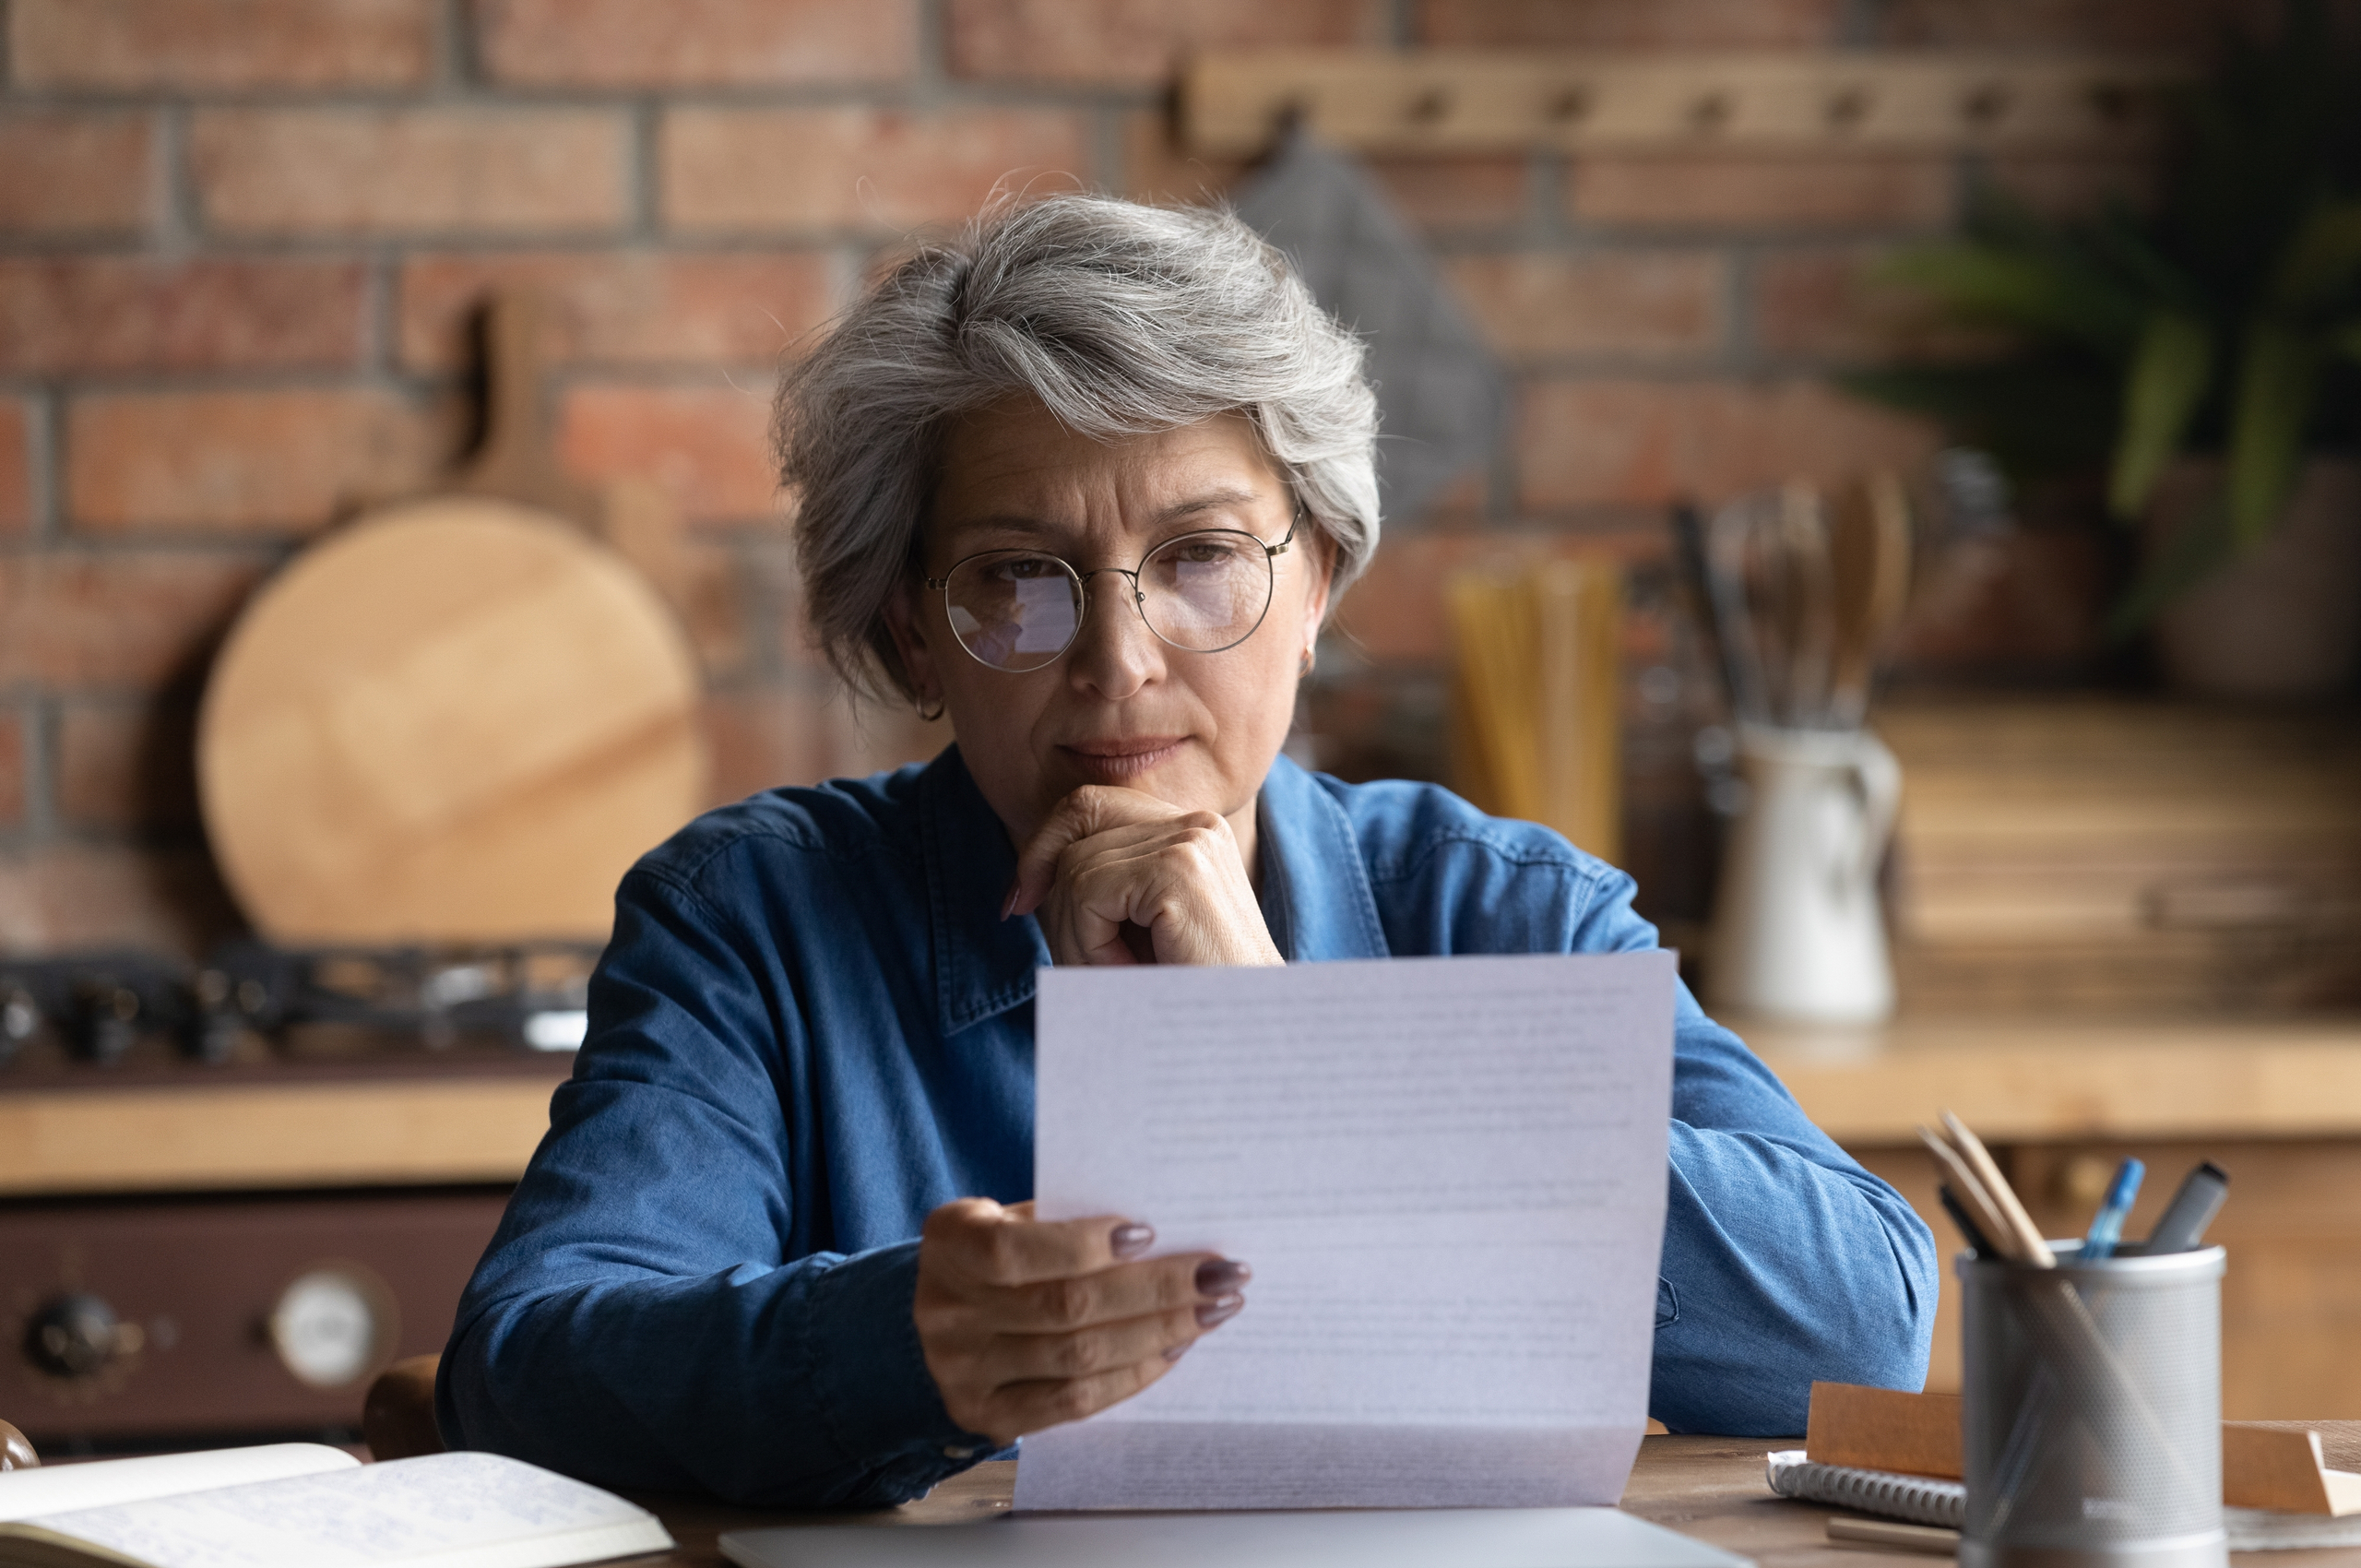 A middle-aged woman looks thoughtfully at a document